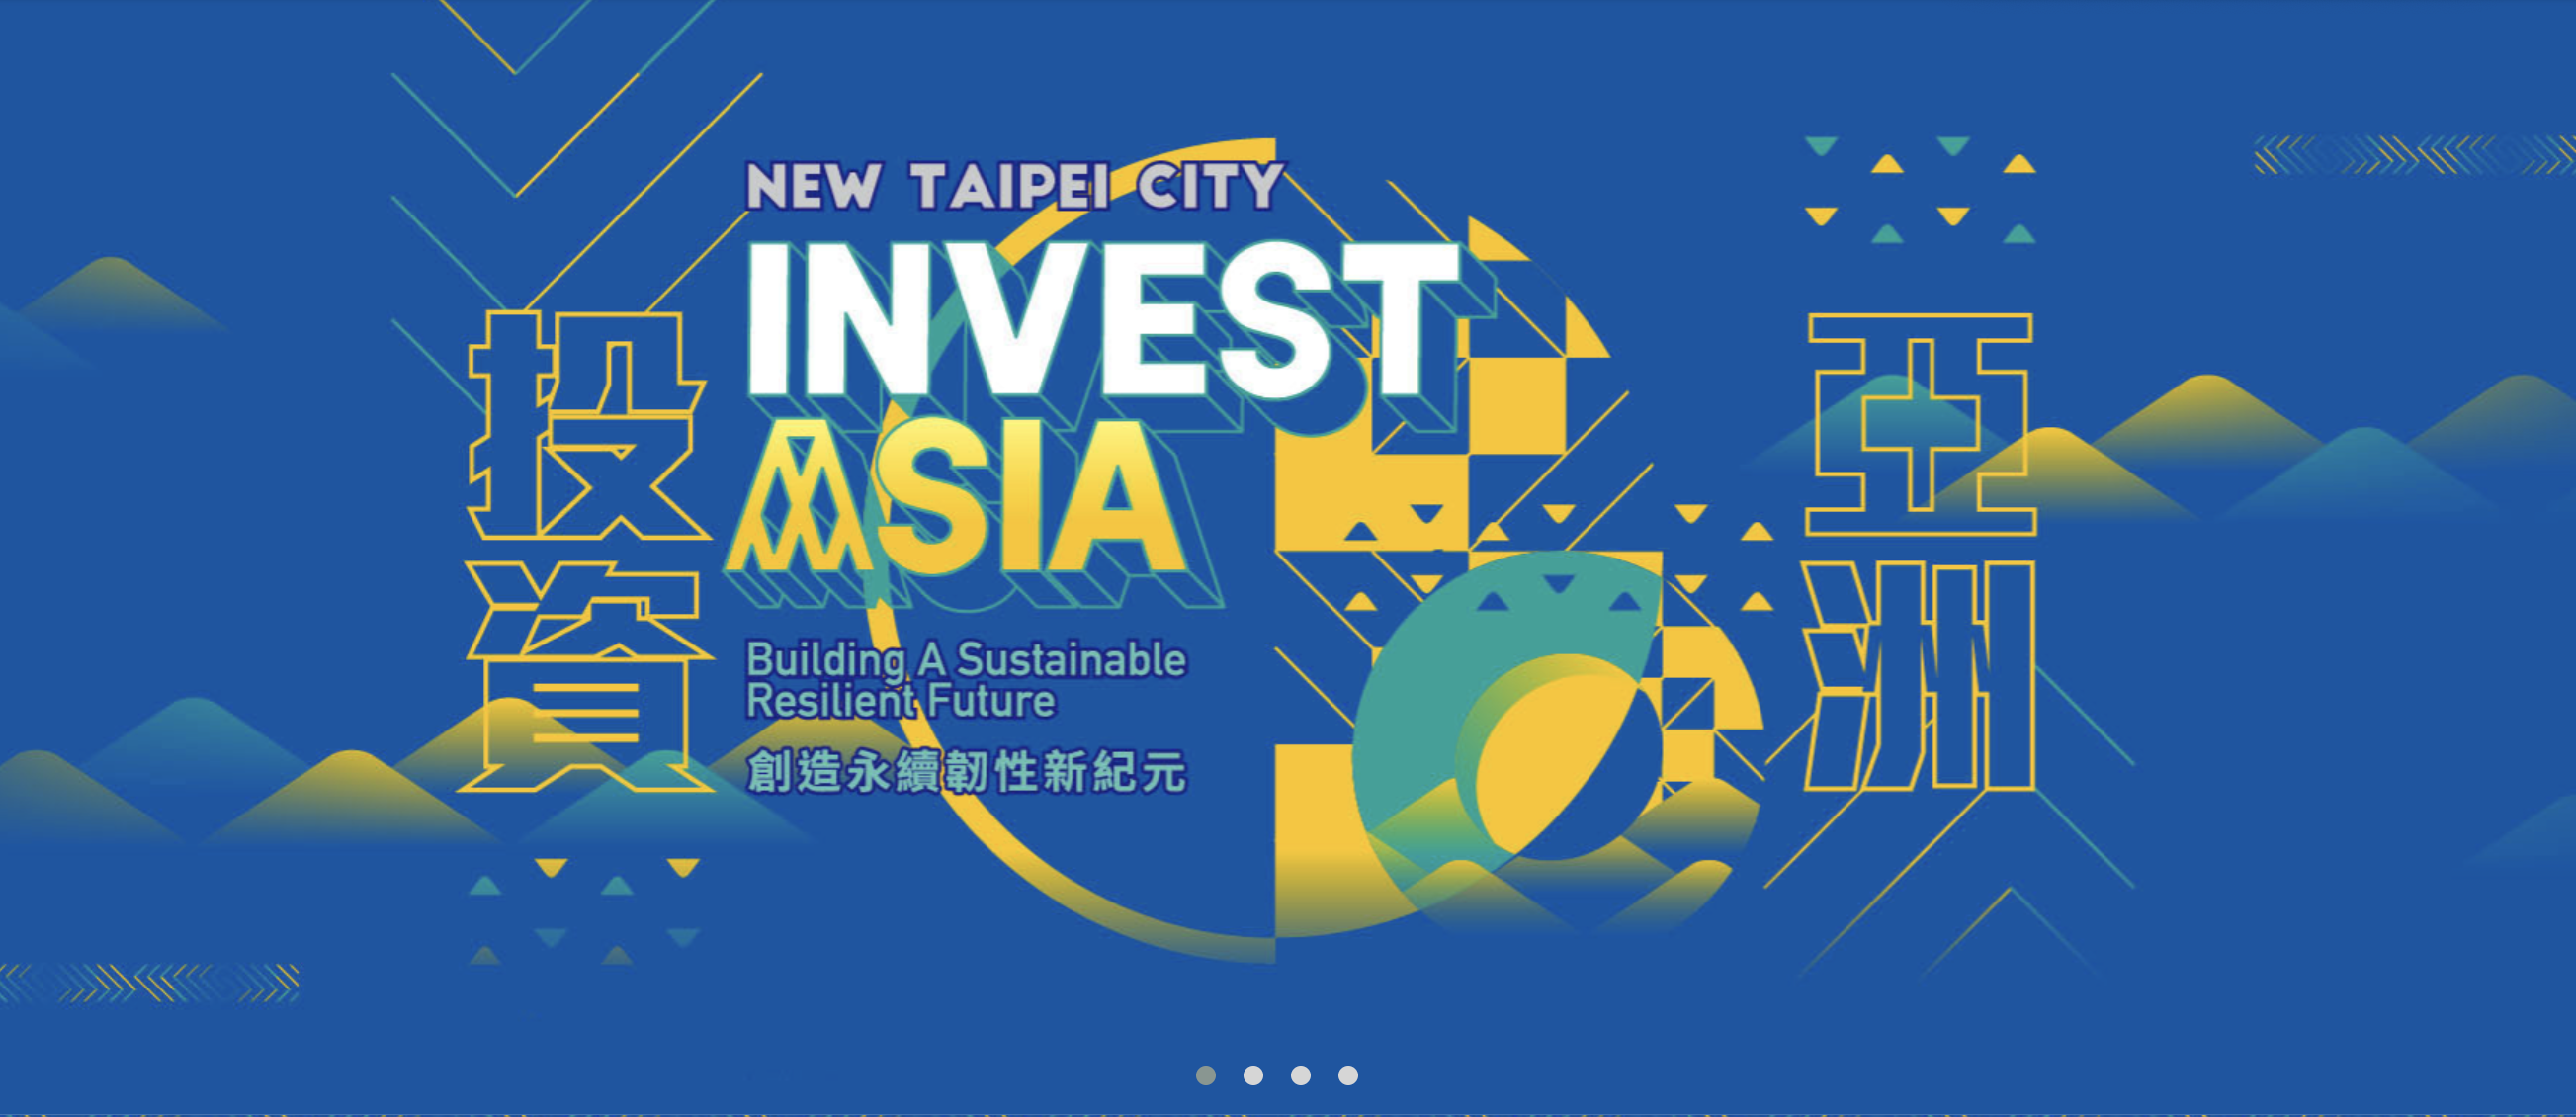 The 2021 Asia Pacific Social Innovation Summit will be held on April 10 and April 11 in New Taipei City. The 2021 Asia Pacific Social Innovation Summit will be held on April 10 and April 11 in New Taipei City. Image courtesy of Asia Pacific Social Innovation Summit website. 